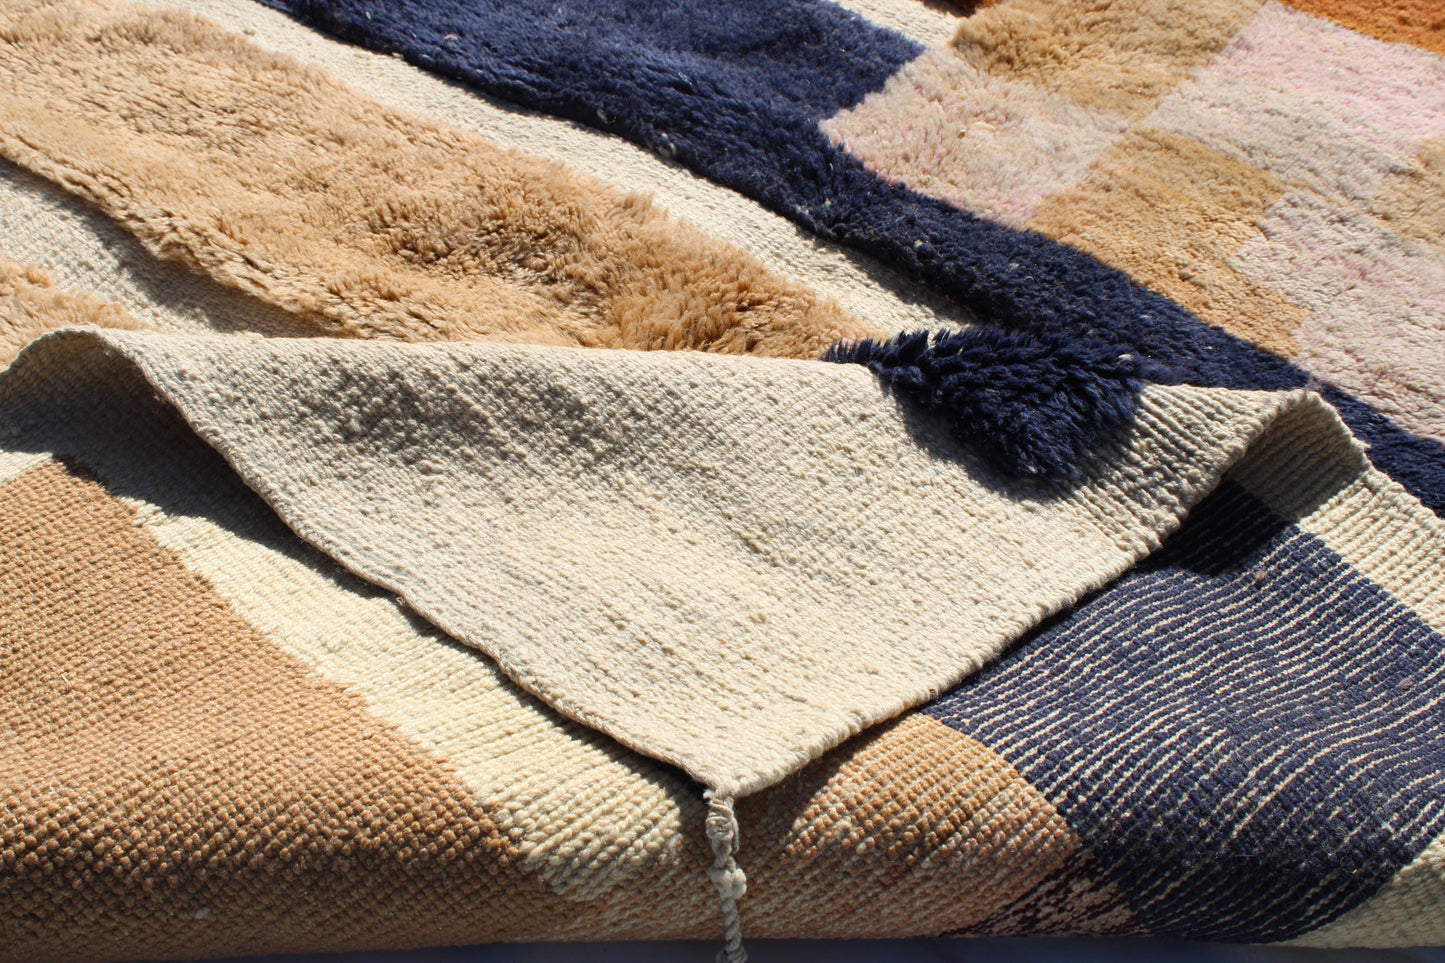 Beni Ourain rugs originate from the Atlas Mountains of Morocco and are characterized by their distinctive, neutral-toned, and geometric designs. These handwoven rugs often feature a plush pile and are made by the Berber tribes,  size is 260x165 cm